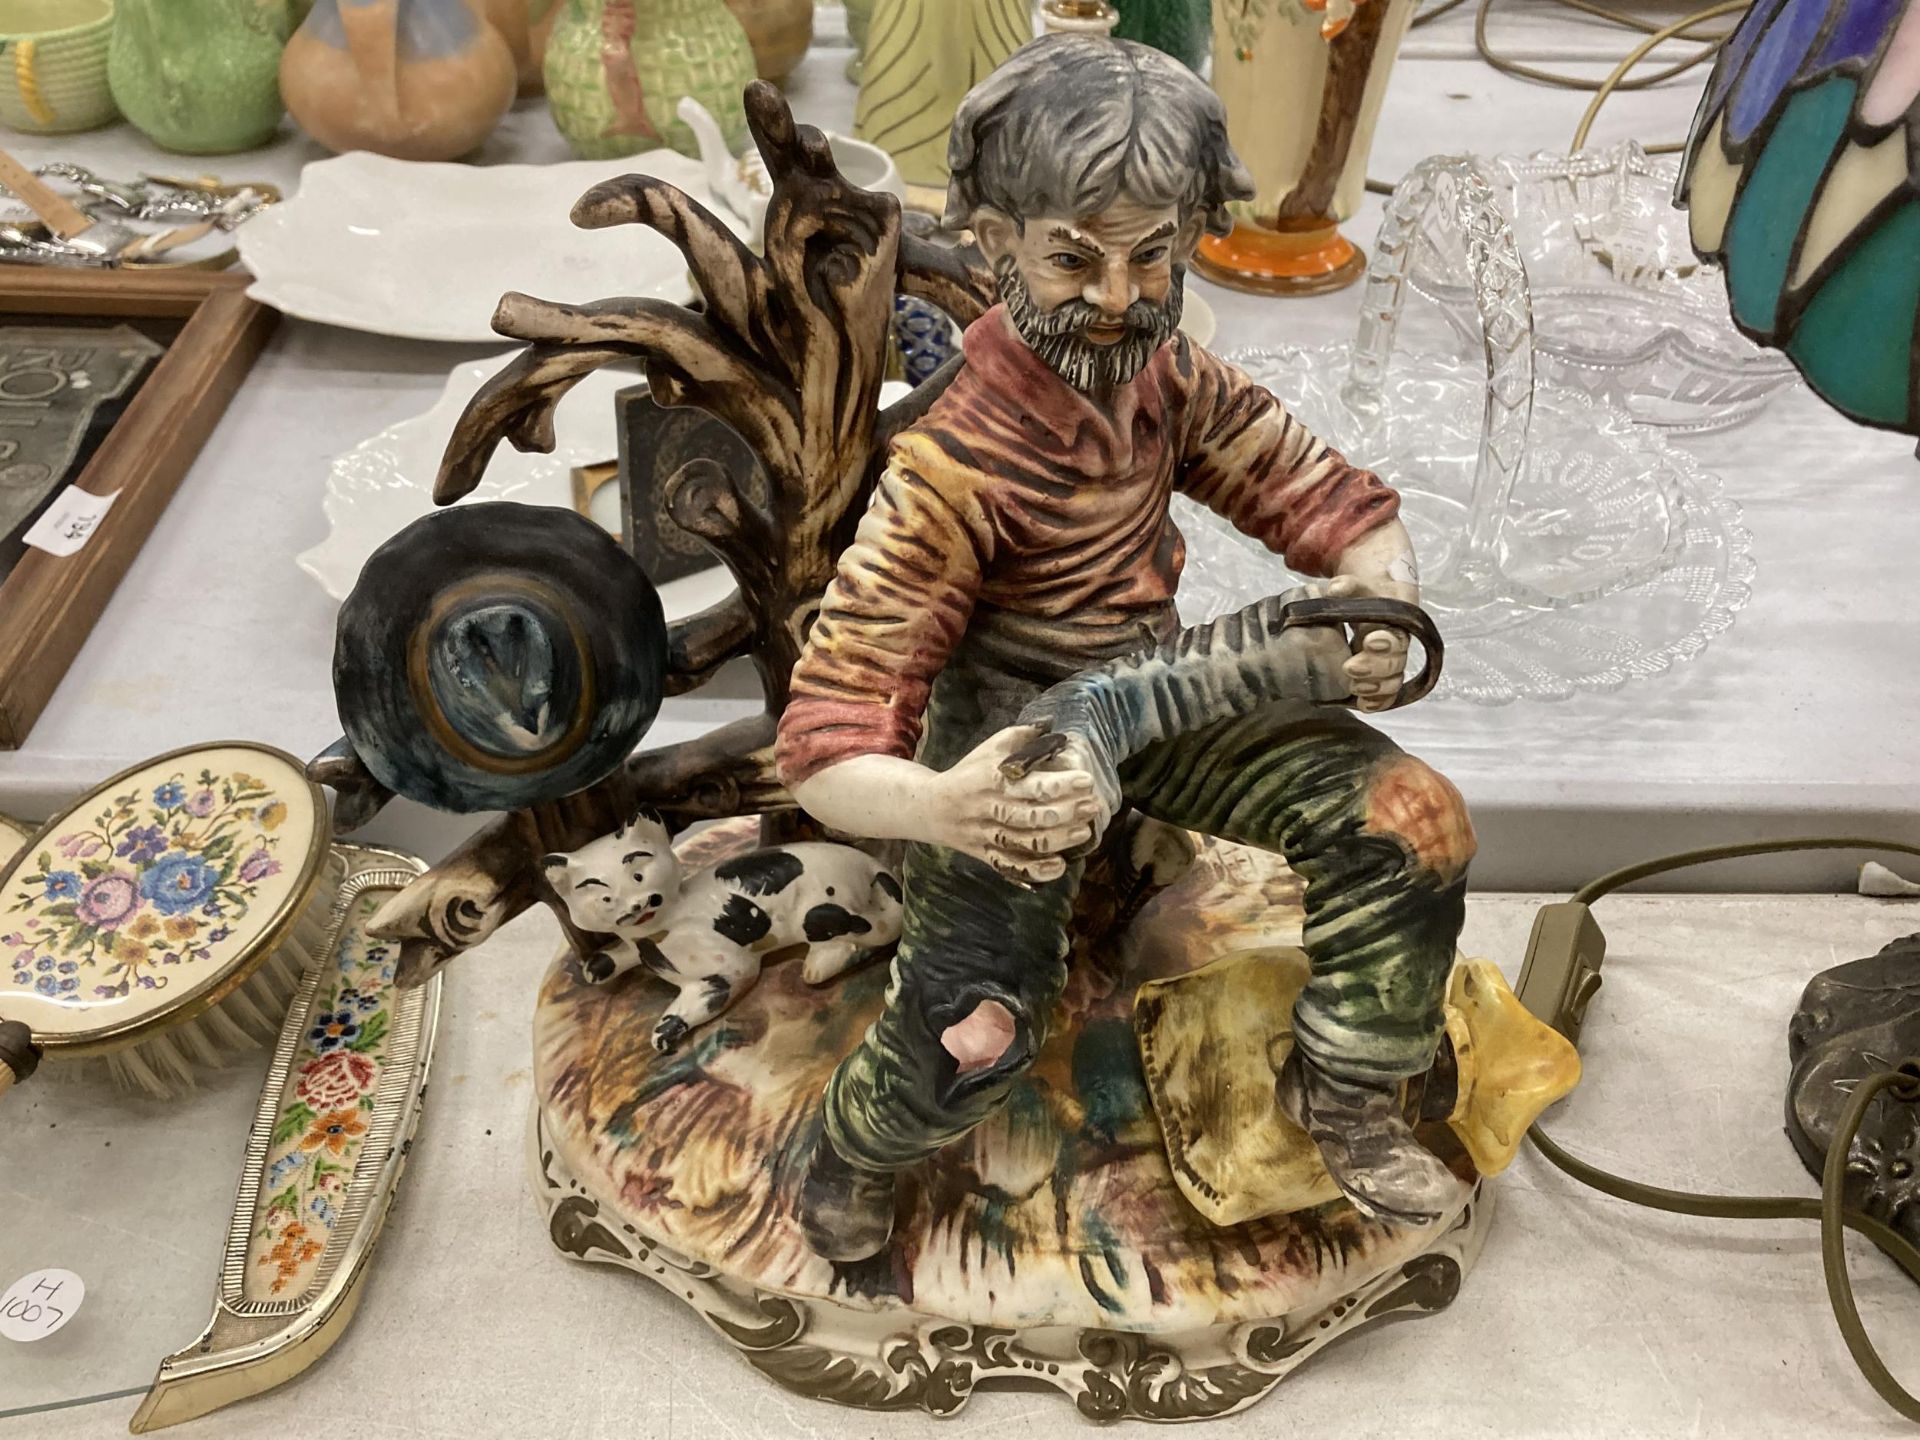 A CAPODIMONTE MODEL OF A MAN AND CAT PLAYING THE ACCORDIAN, CAPODIMONTE STYLE MAN ON A BENCH - A/F - Image 4 of 5